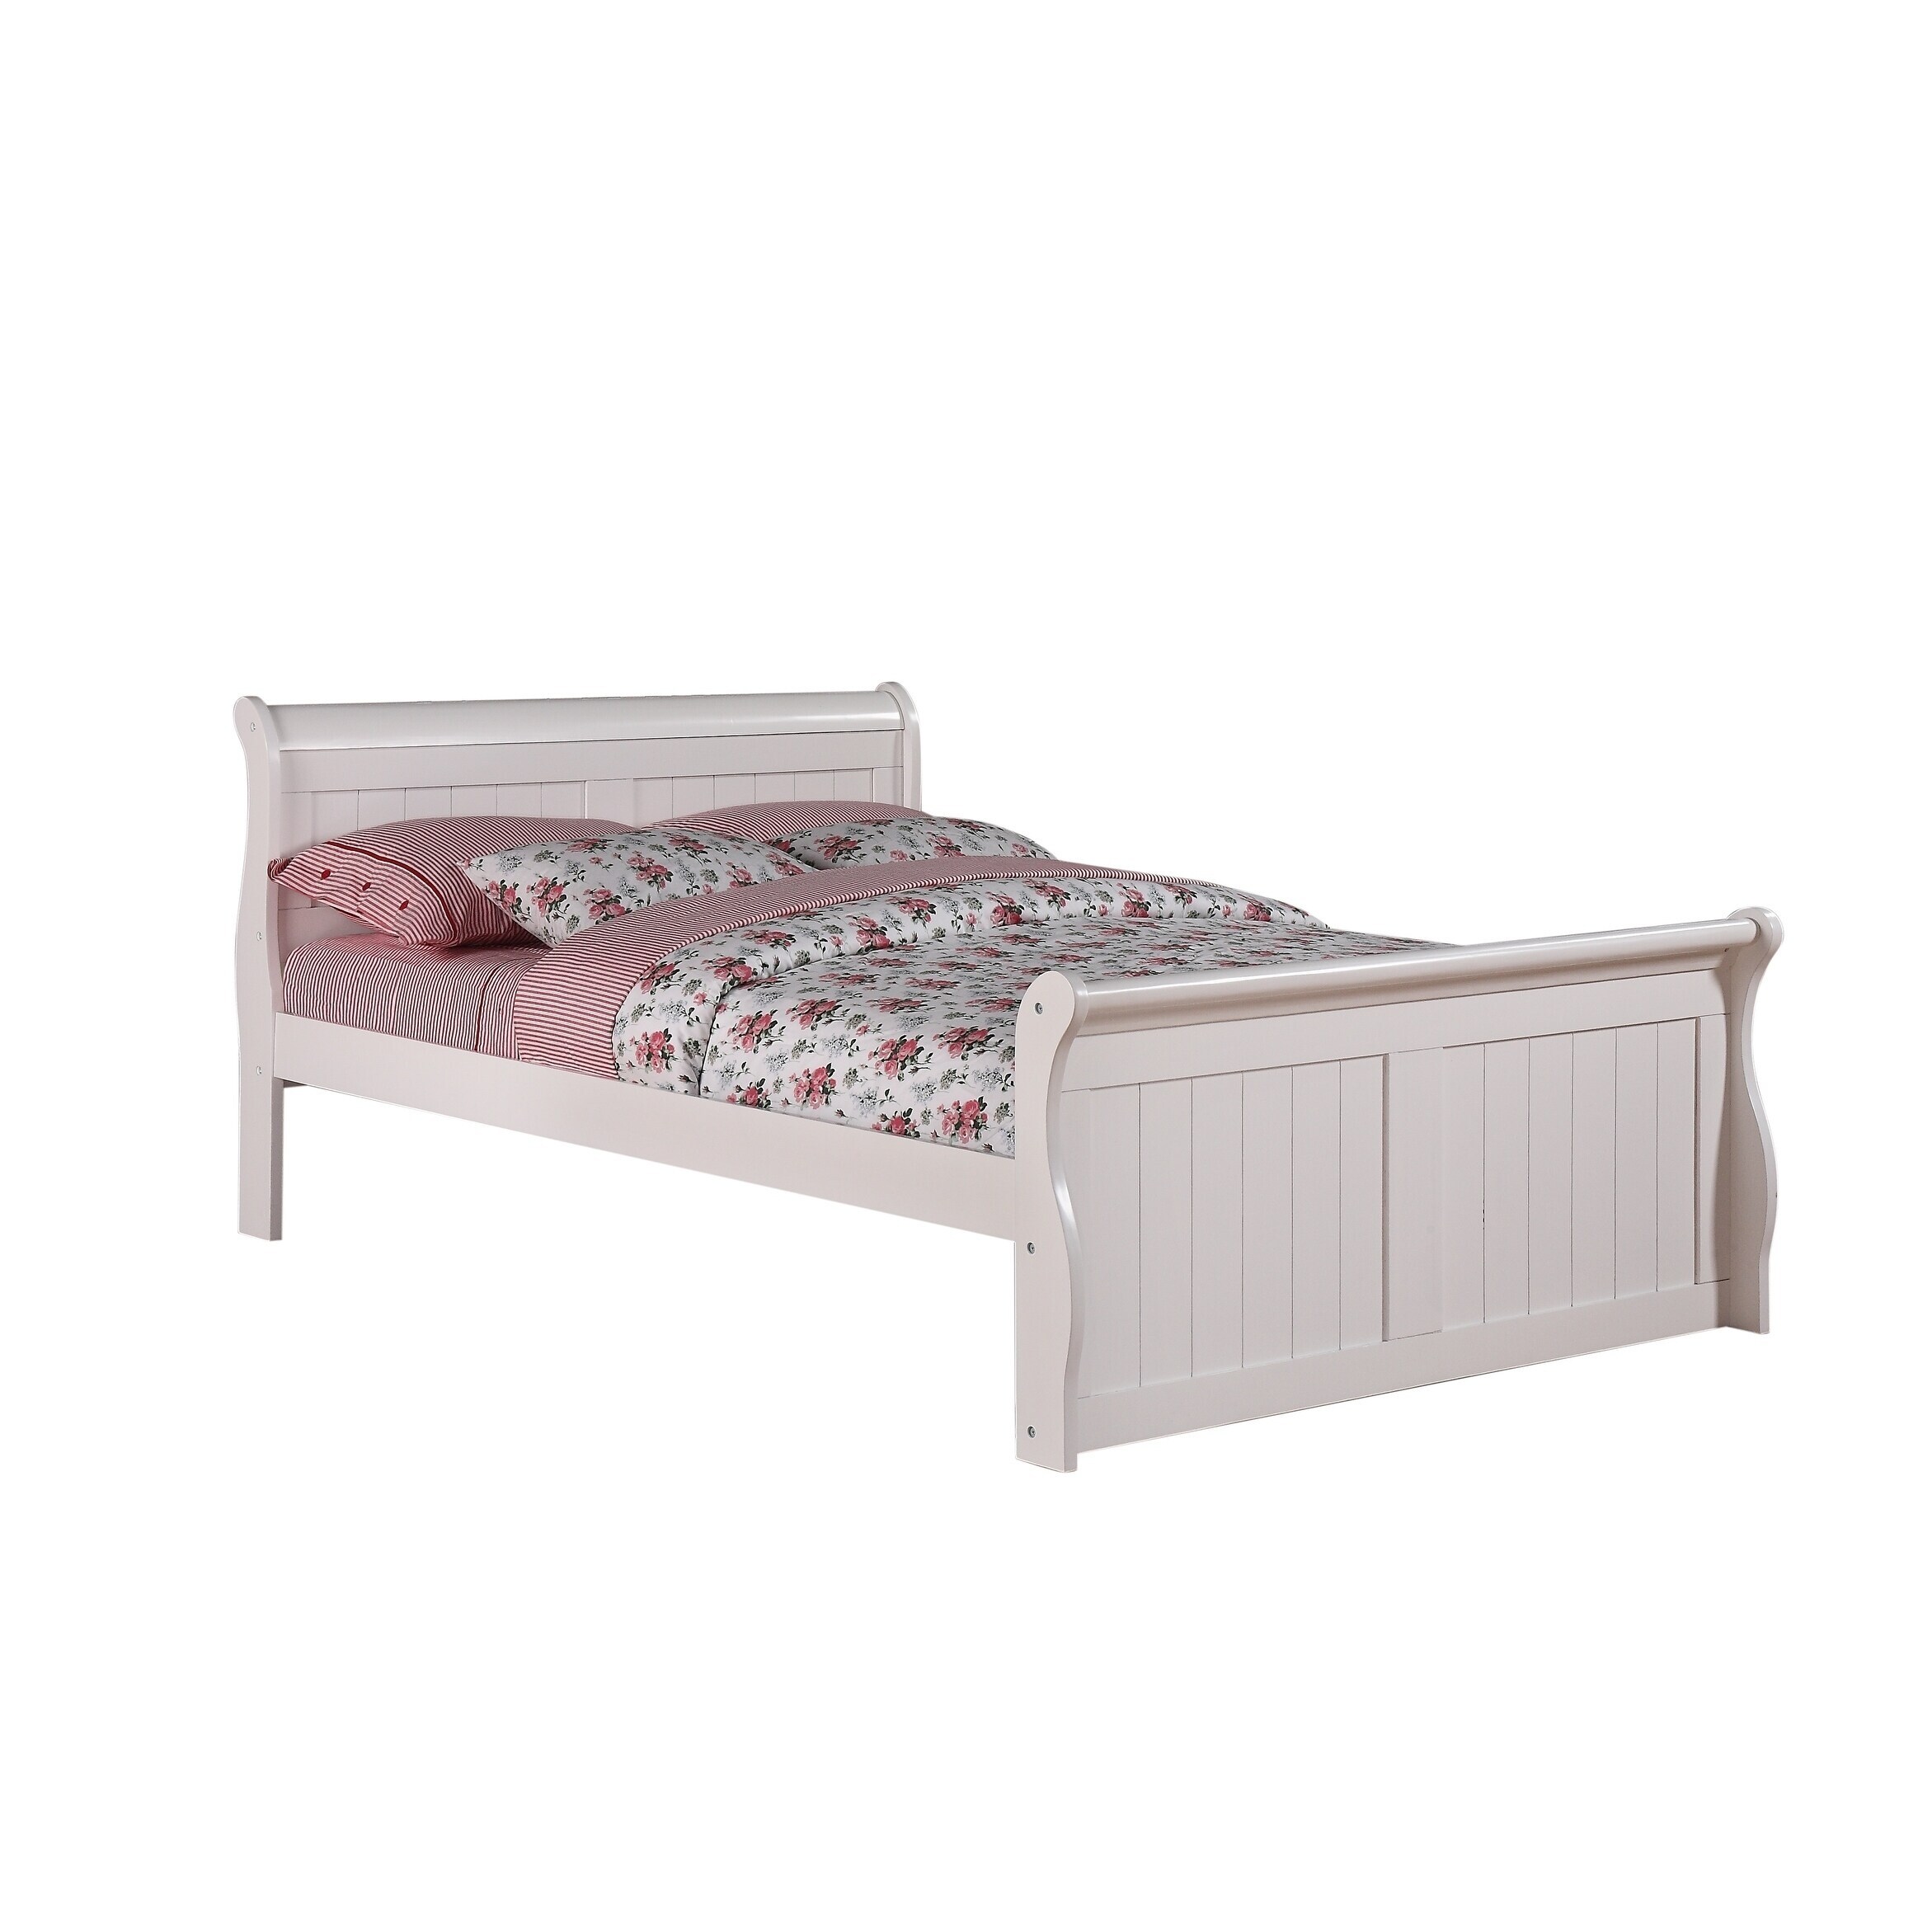 Donco Kids White Sleigh Bed with Under Bed Storage Drawers